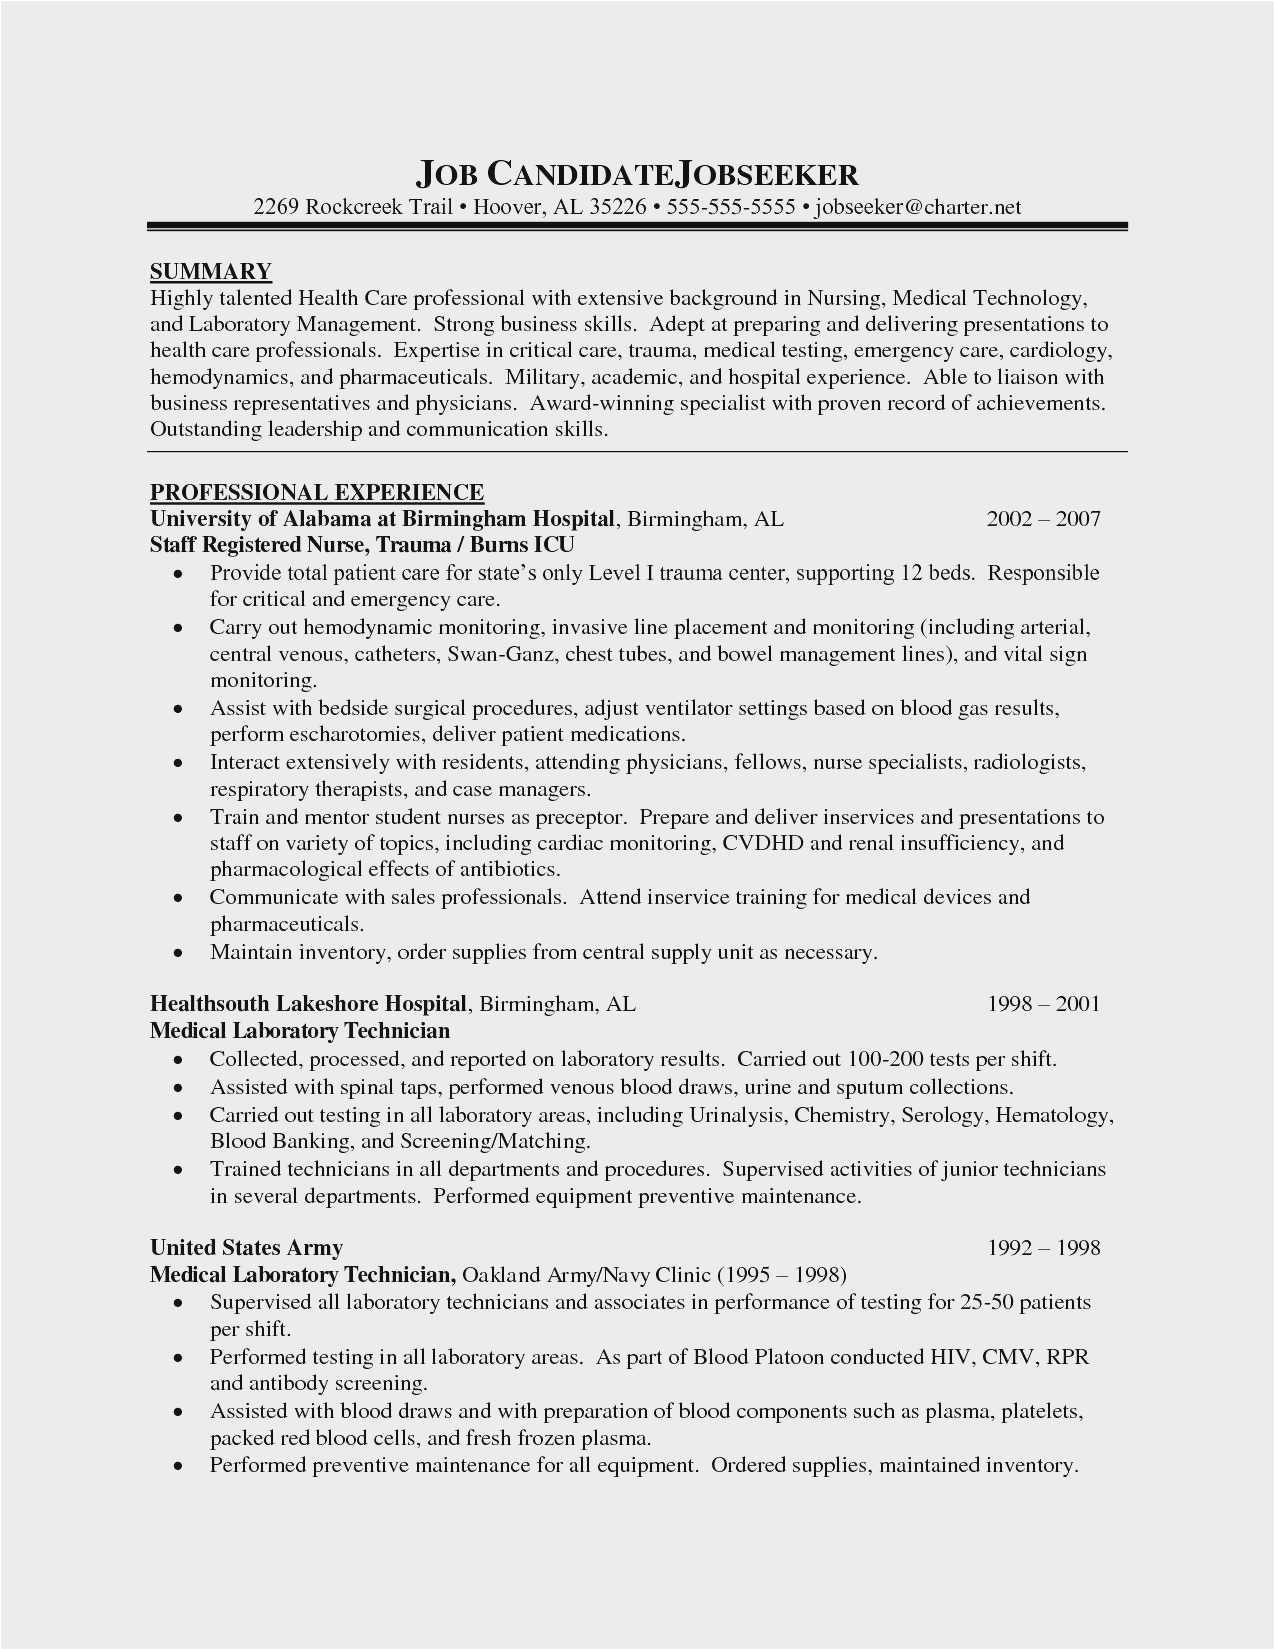 Sample Resume Cna No Previous Experience Cna Resume Examples with No Experience Free Collection 52